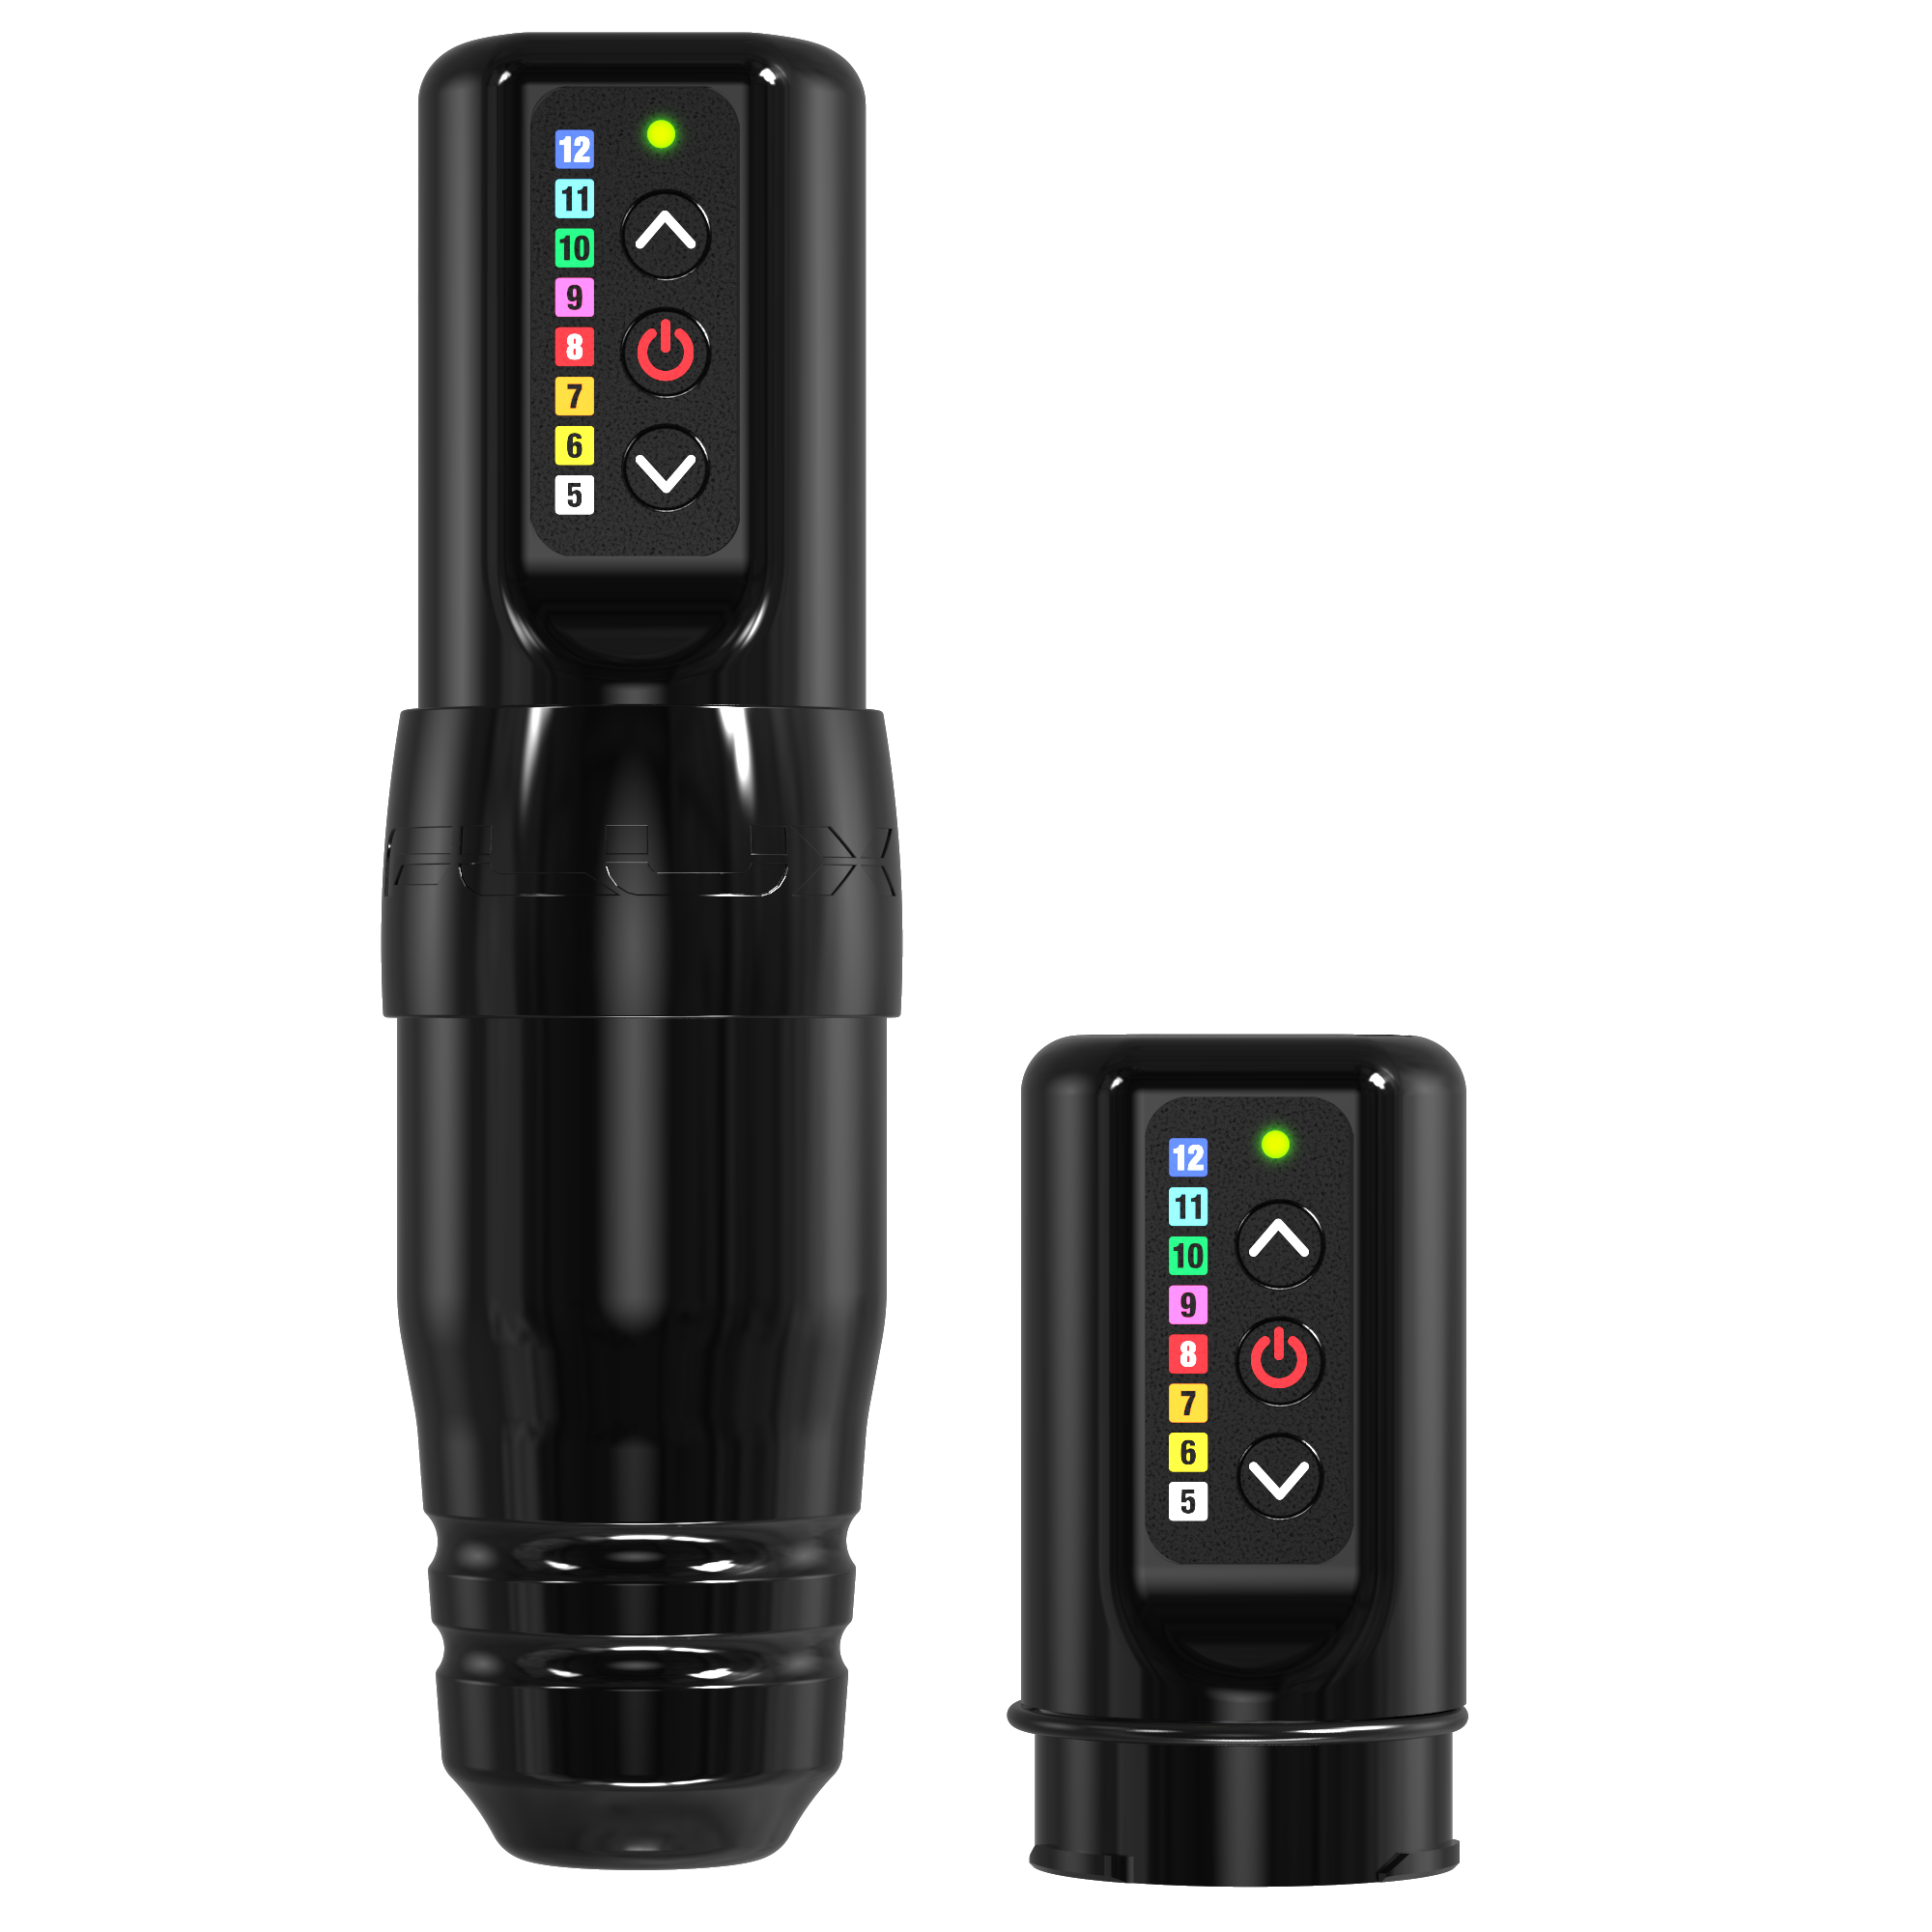 Cordless Flux S™ PMU machine in all black with an auxiliary battery (not included, but you can purchase it as a bundle and save $)